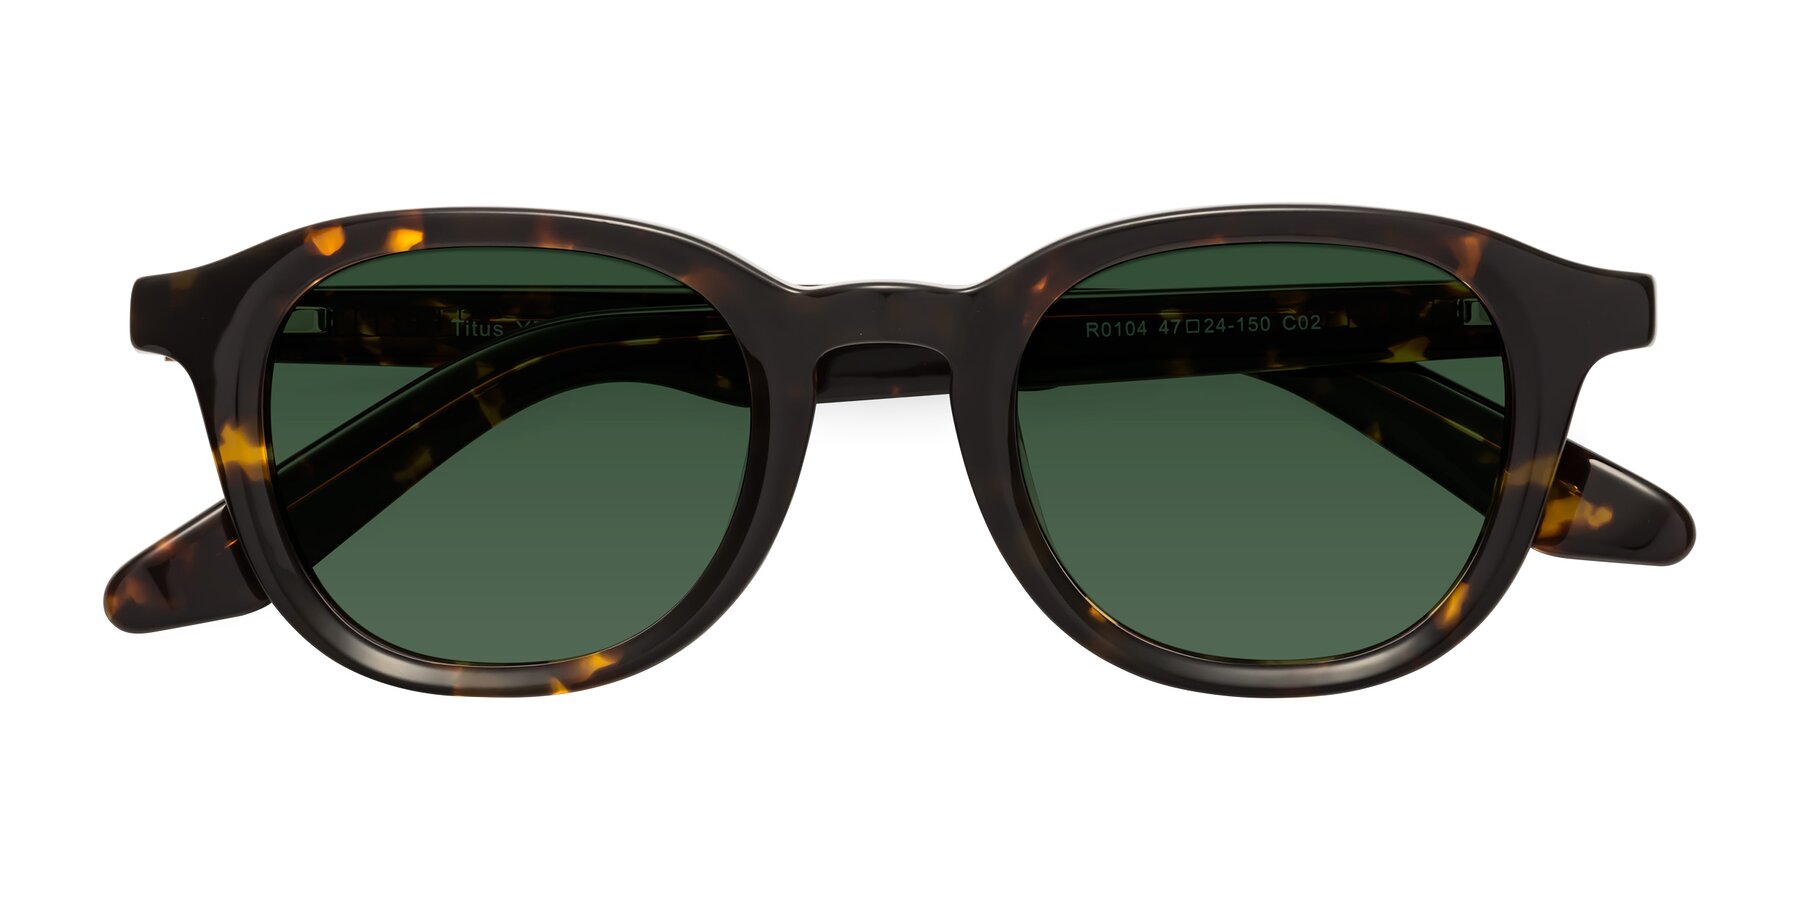 Folded Front of Titus in Tortoise with Green Tinted Lenses